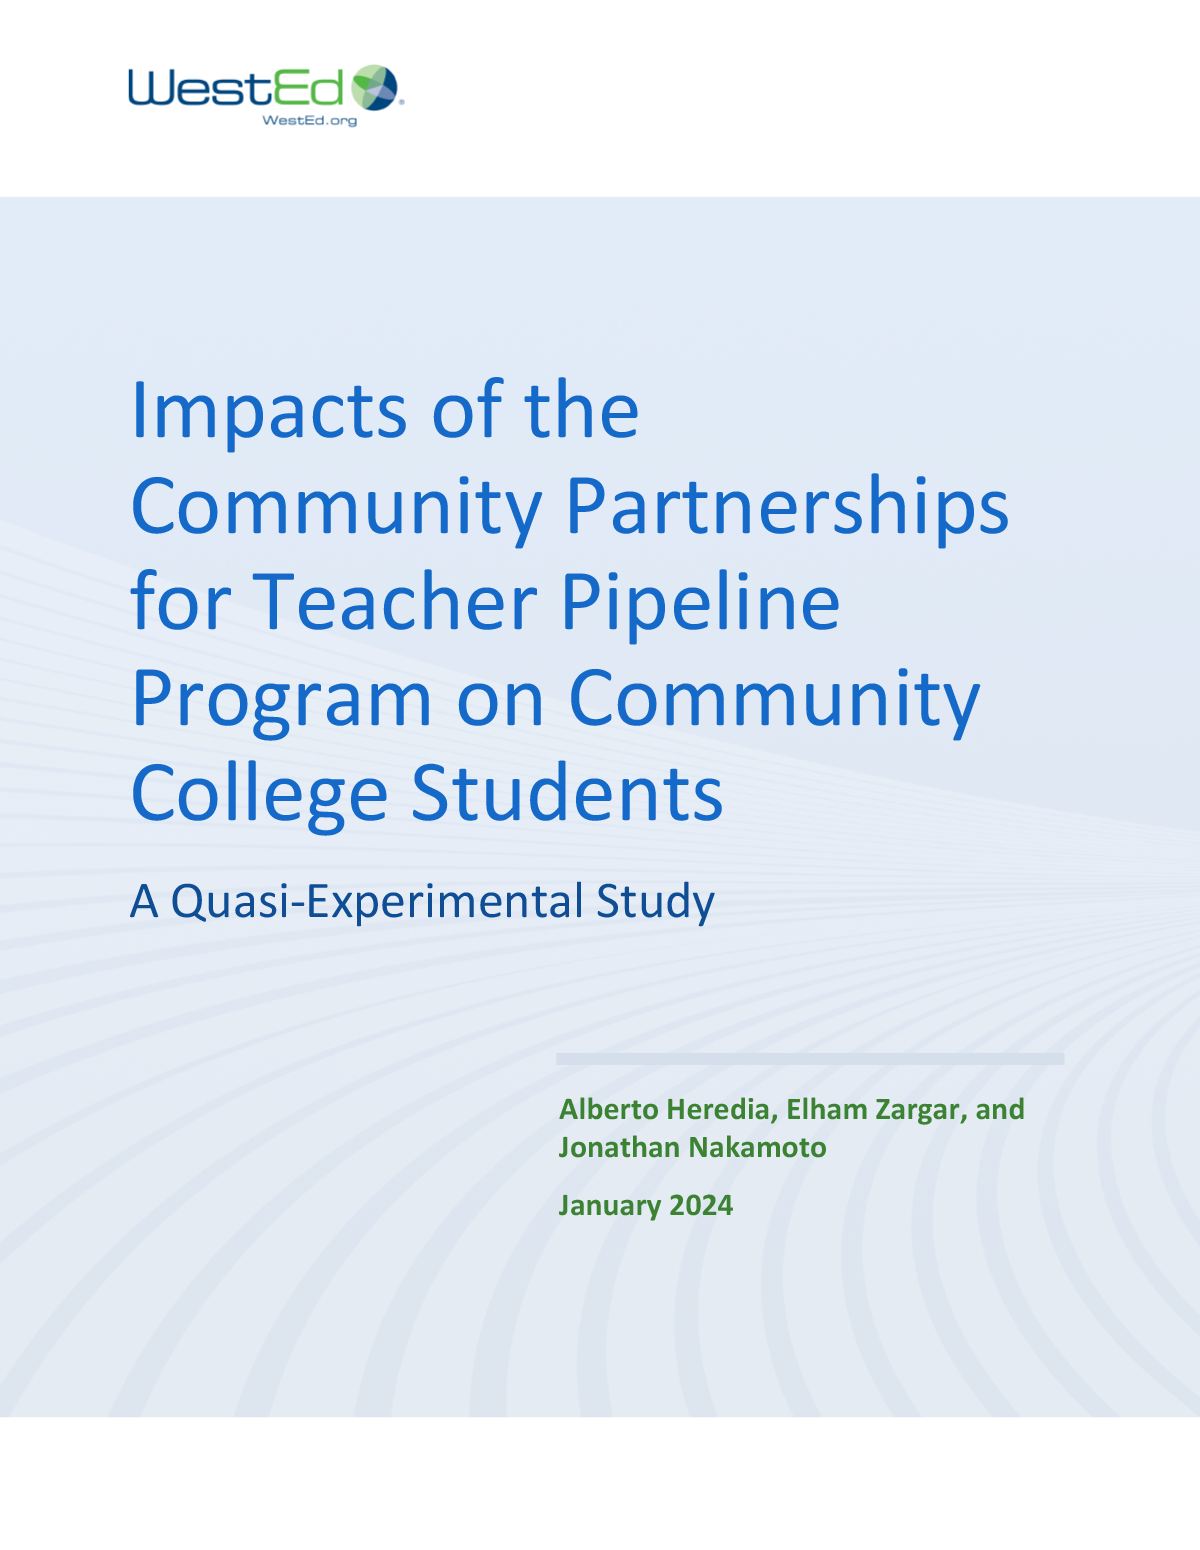 Impacts of the Community Partnerships for Teacher Pipeline Program on Community College Students: A Quasi-Experimental Study